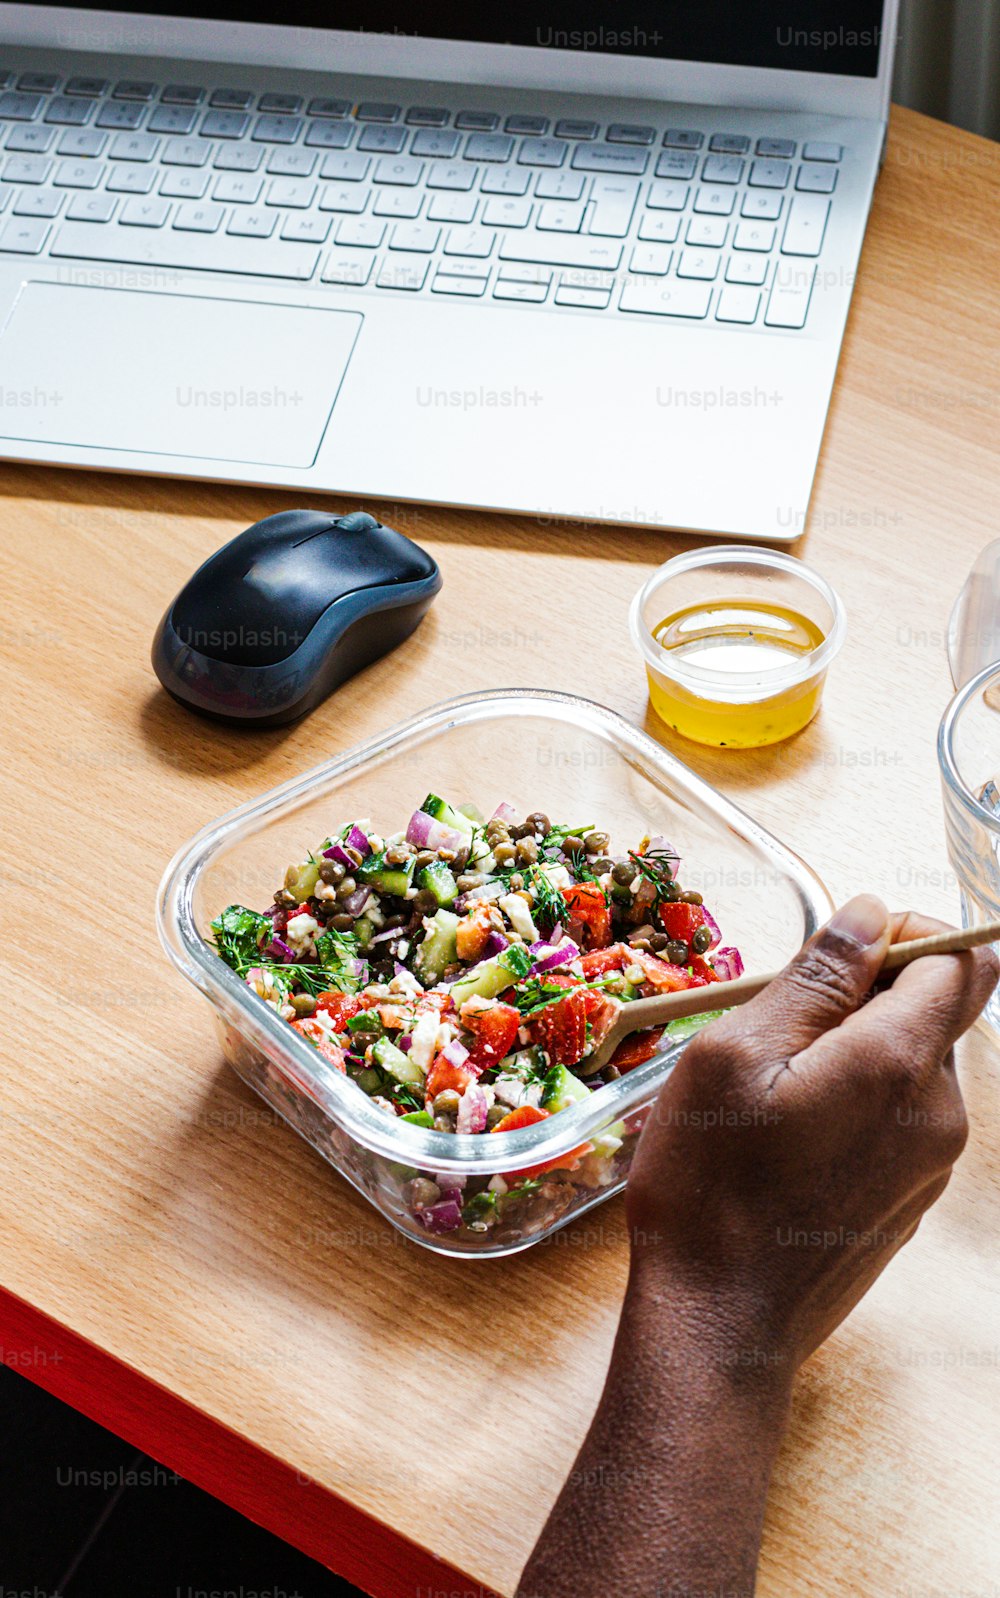 a person is eating a salad in front of a laptop